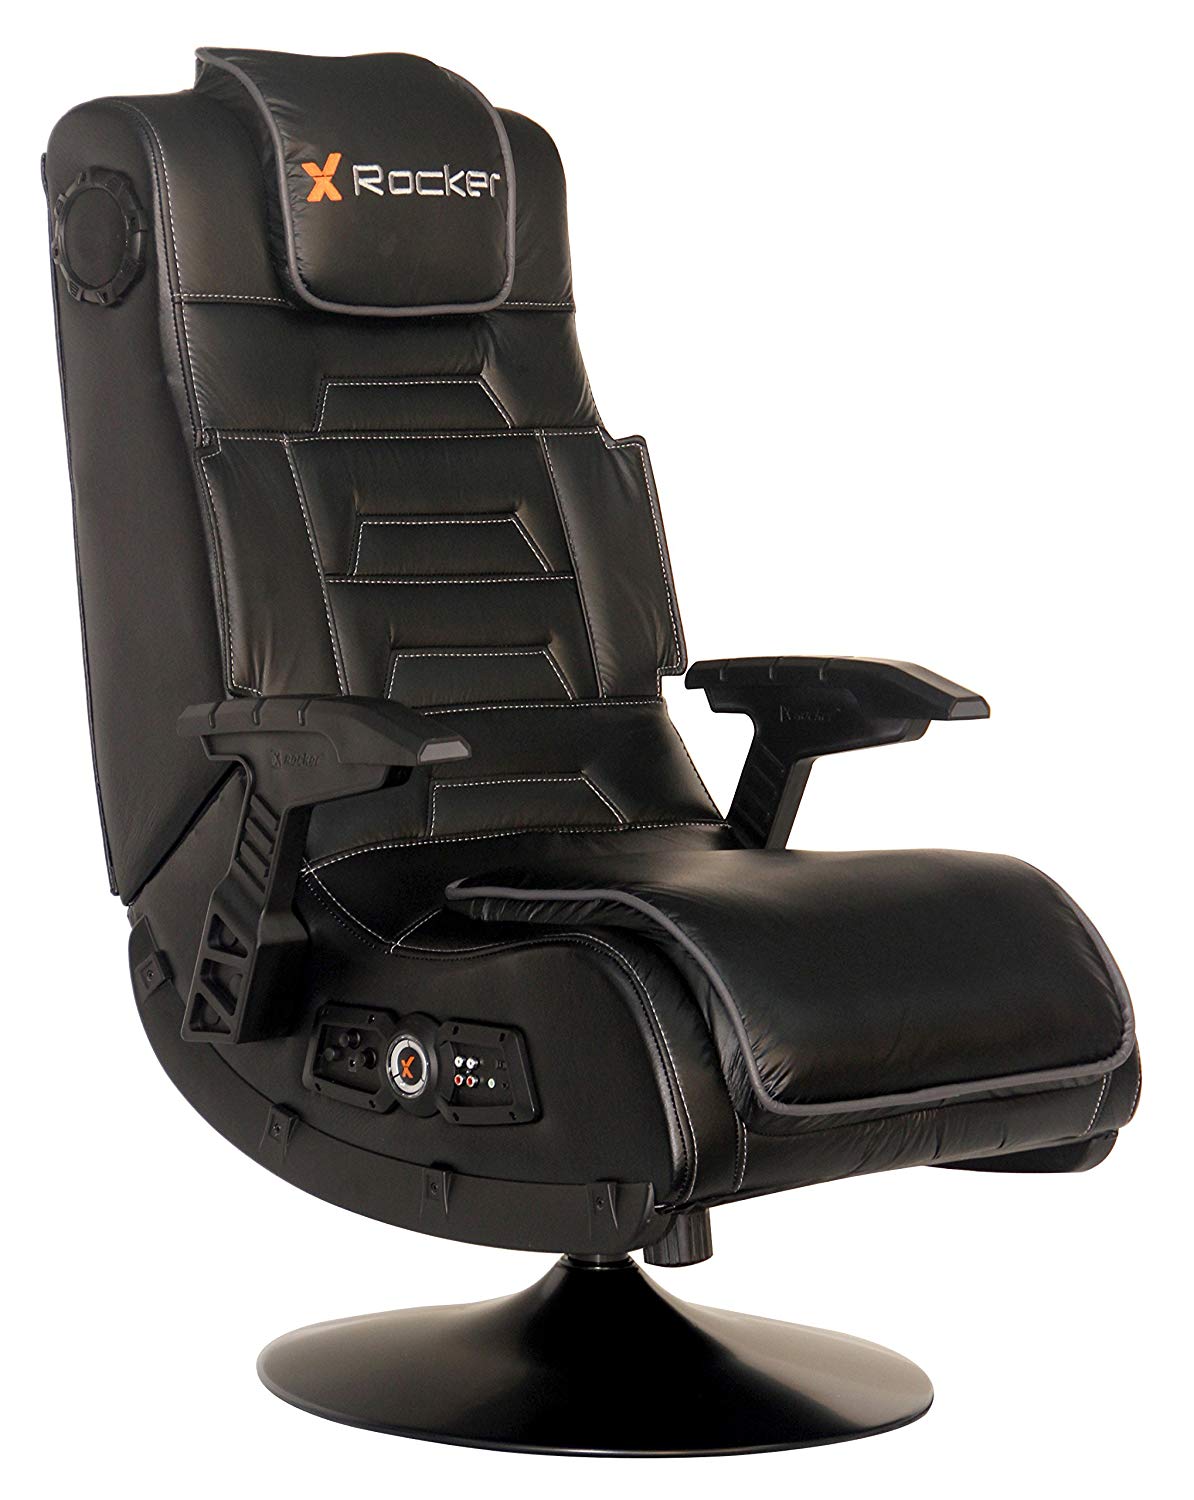 Best Gaming Chairs for Adults The Top Chair Reviews (2018)